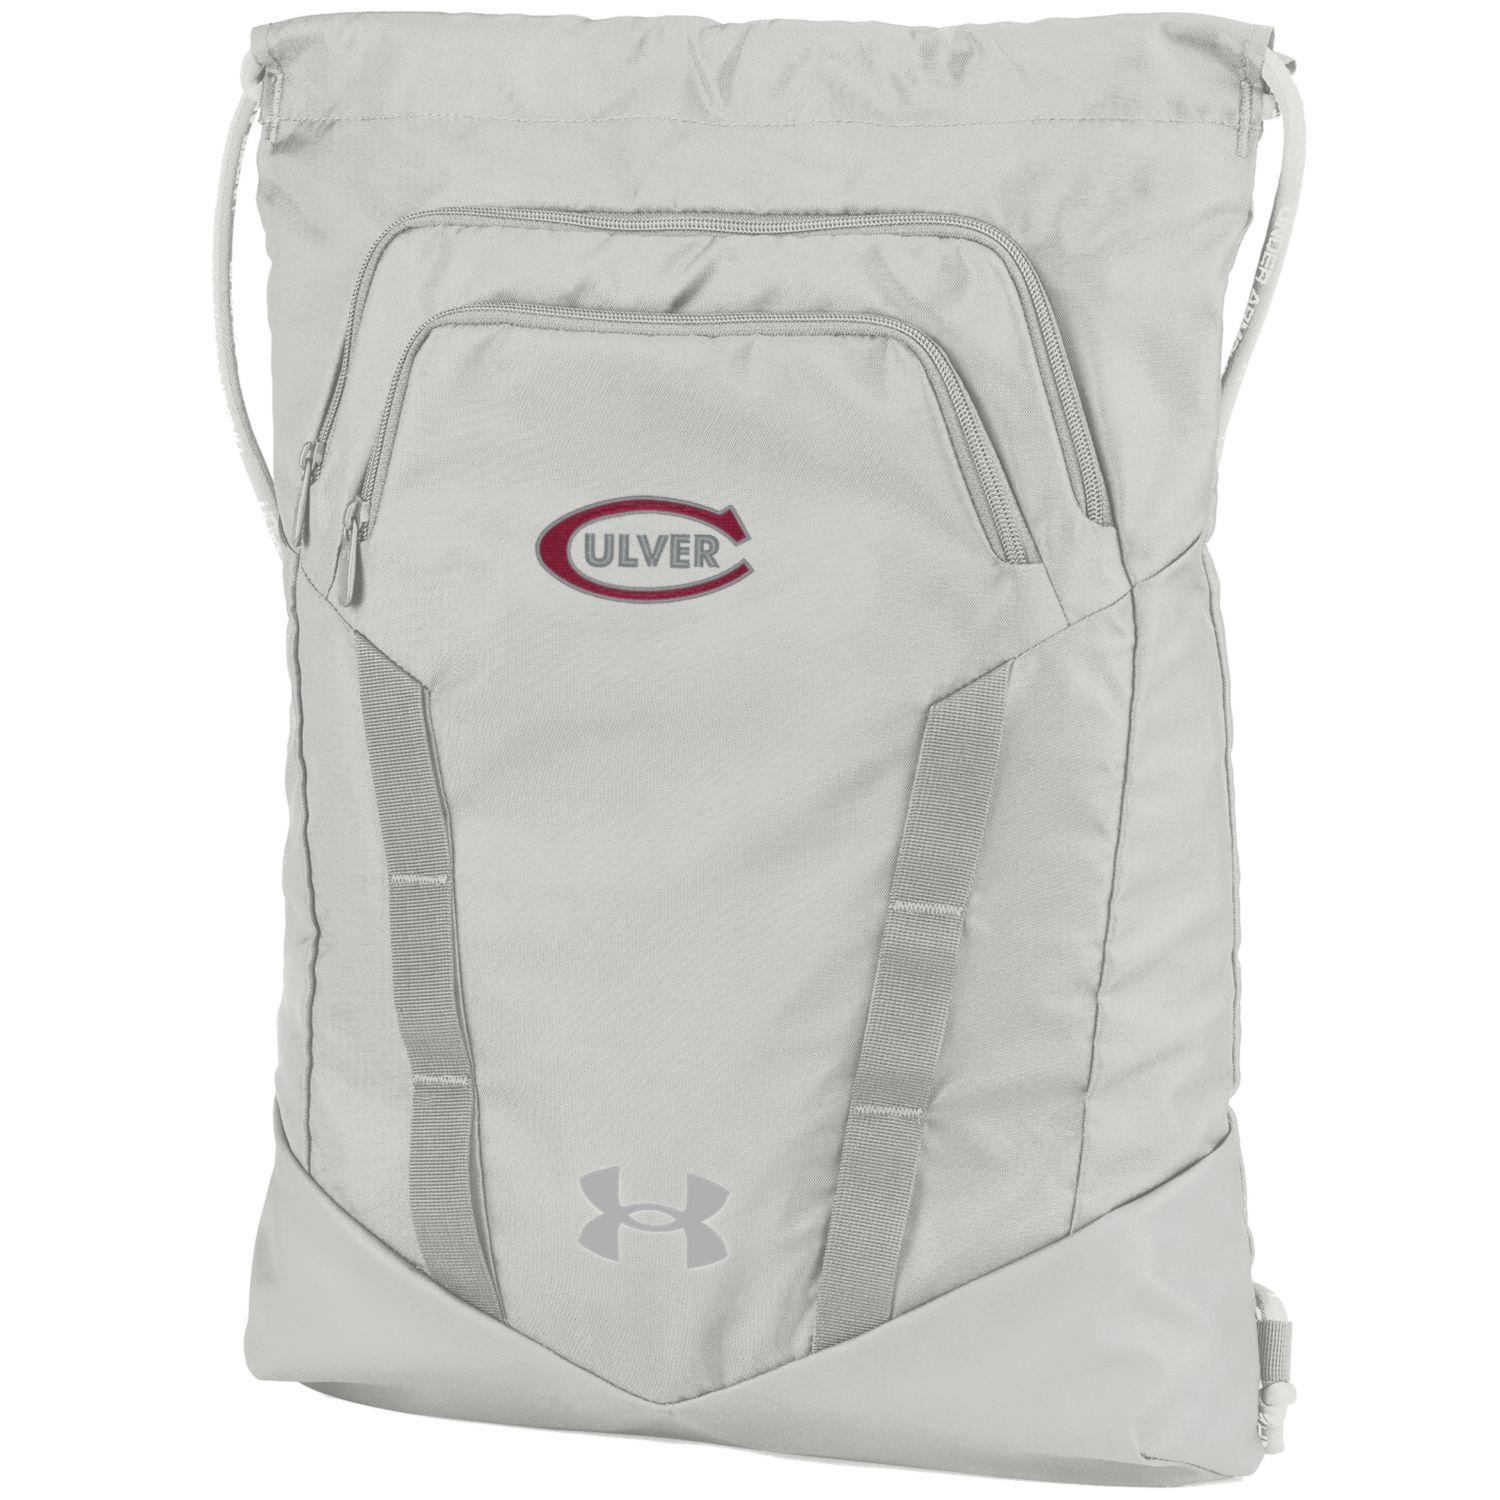 Under Armour Undeniable Sackpack - Summit White